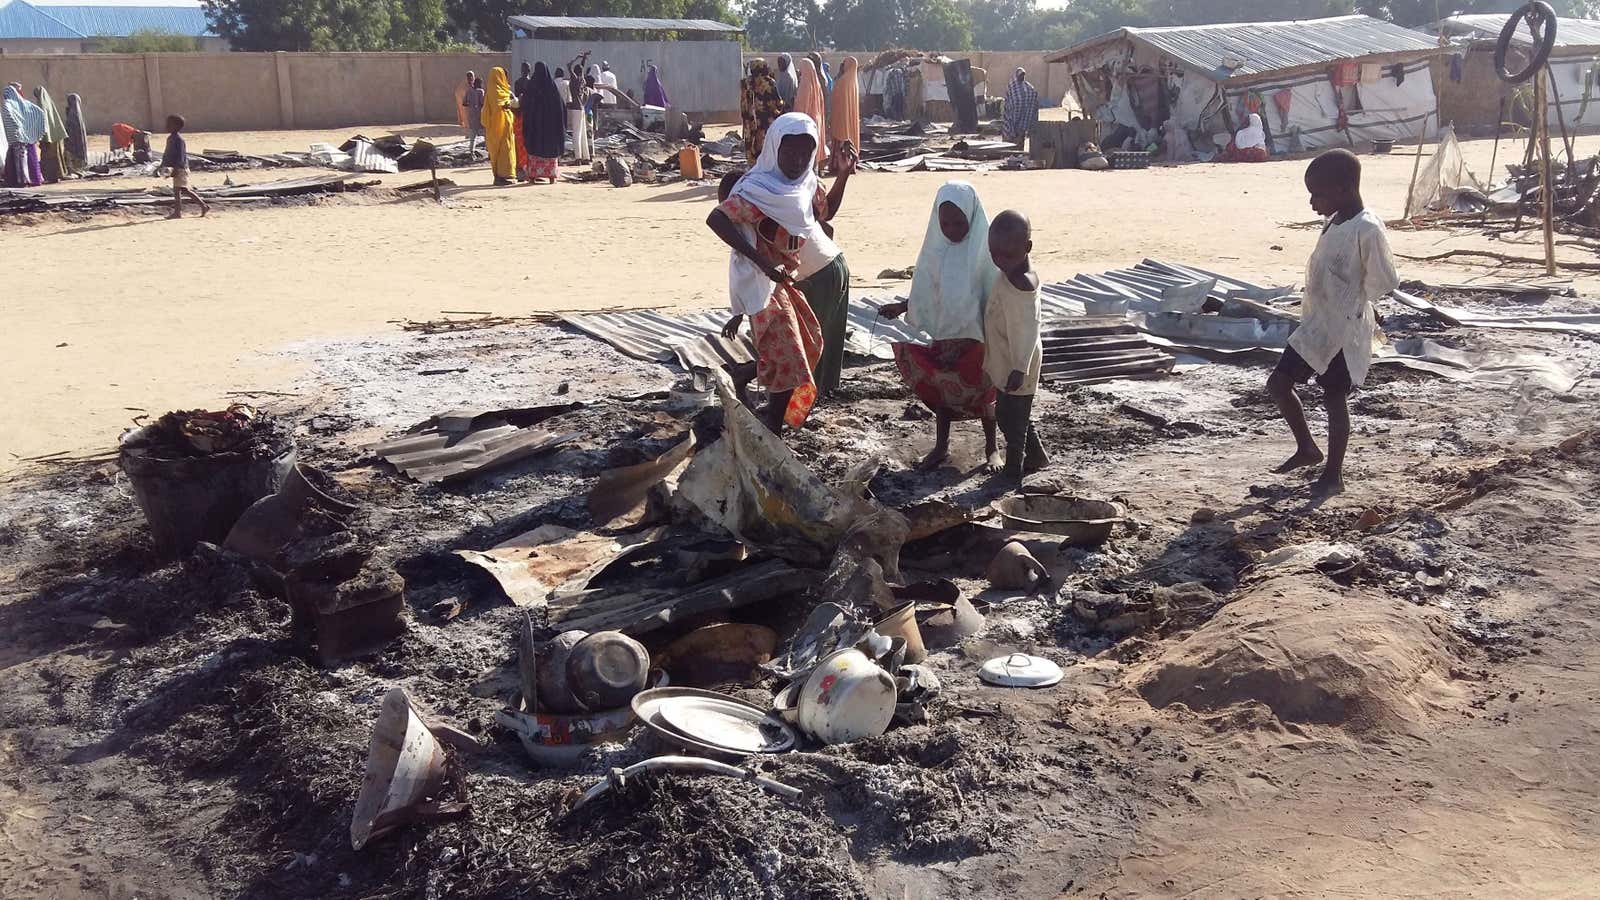 A camp for displaced people after an attack by suspected members of the Islamist Boko Haram insurgency in Dalori, Nigeria Nov. 1, 2018.